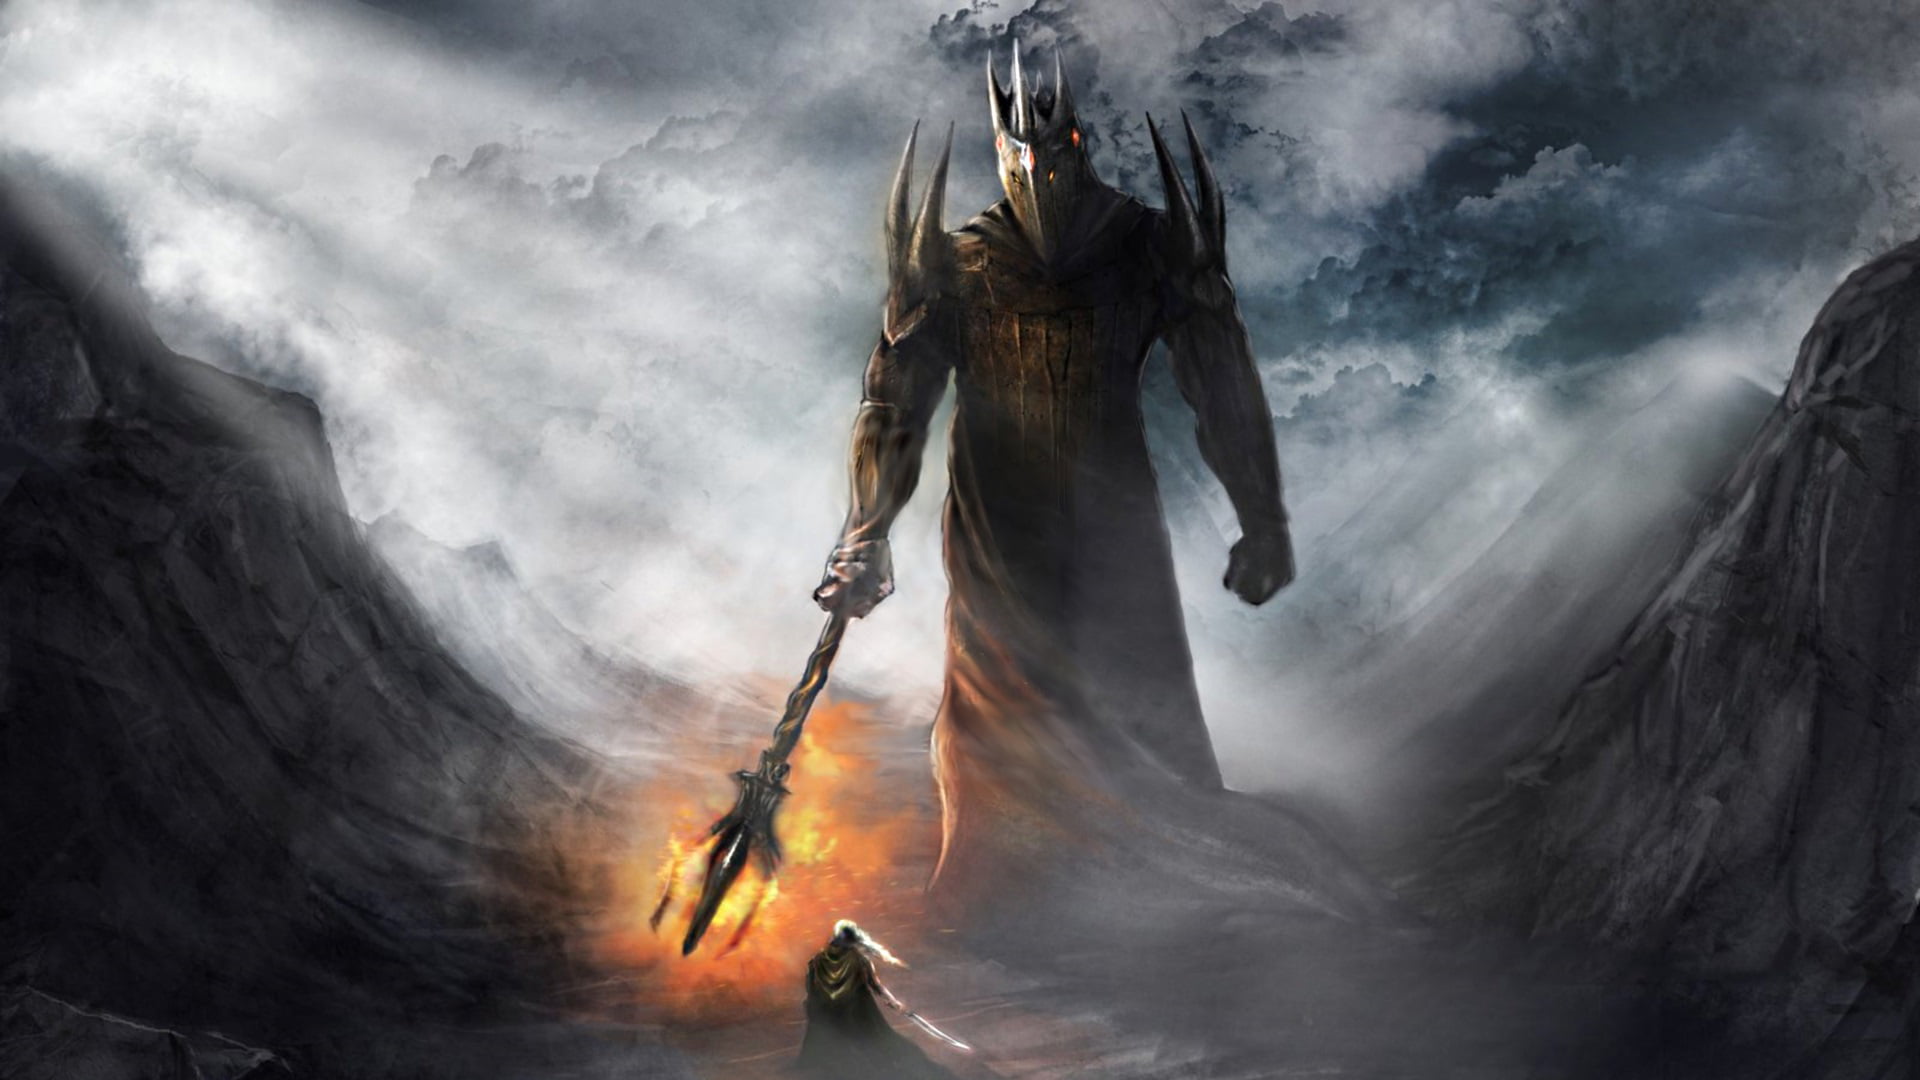 The lord of the rings, morgoth, tolkien, lotr